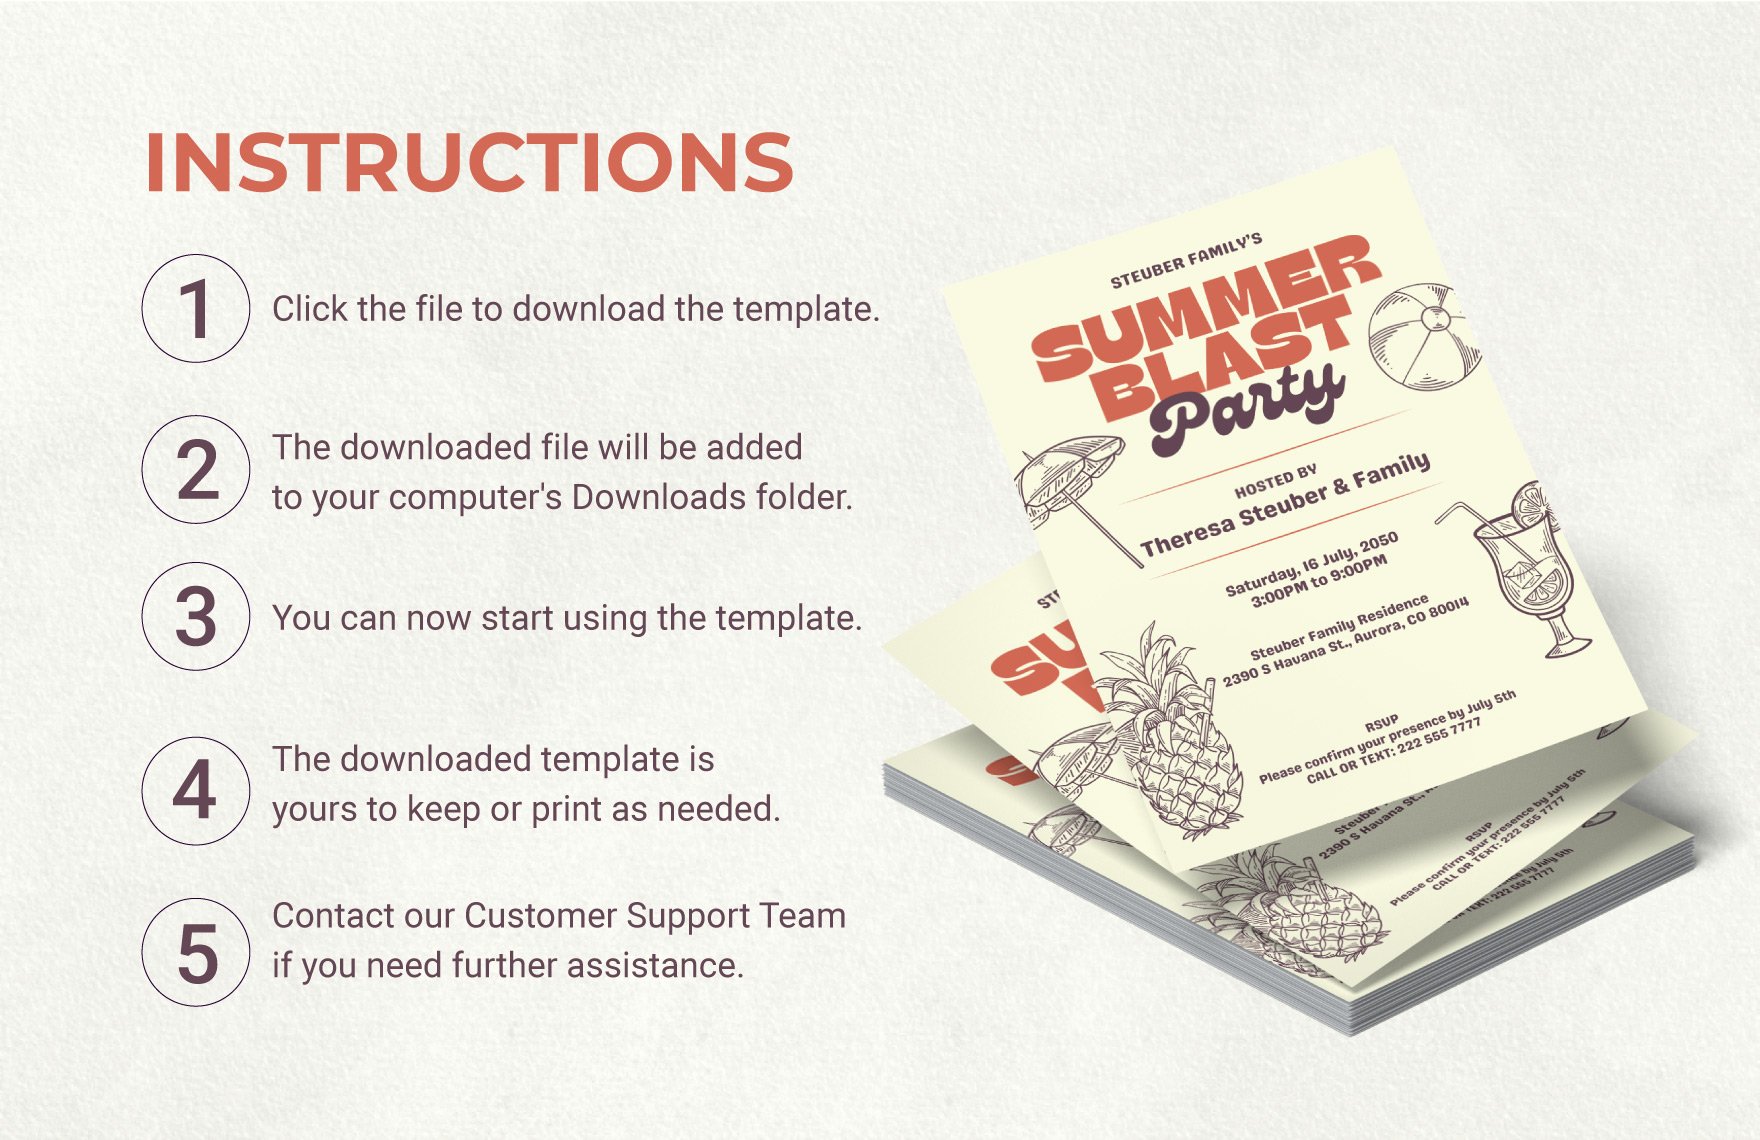 Party Invitation Flyer Template